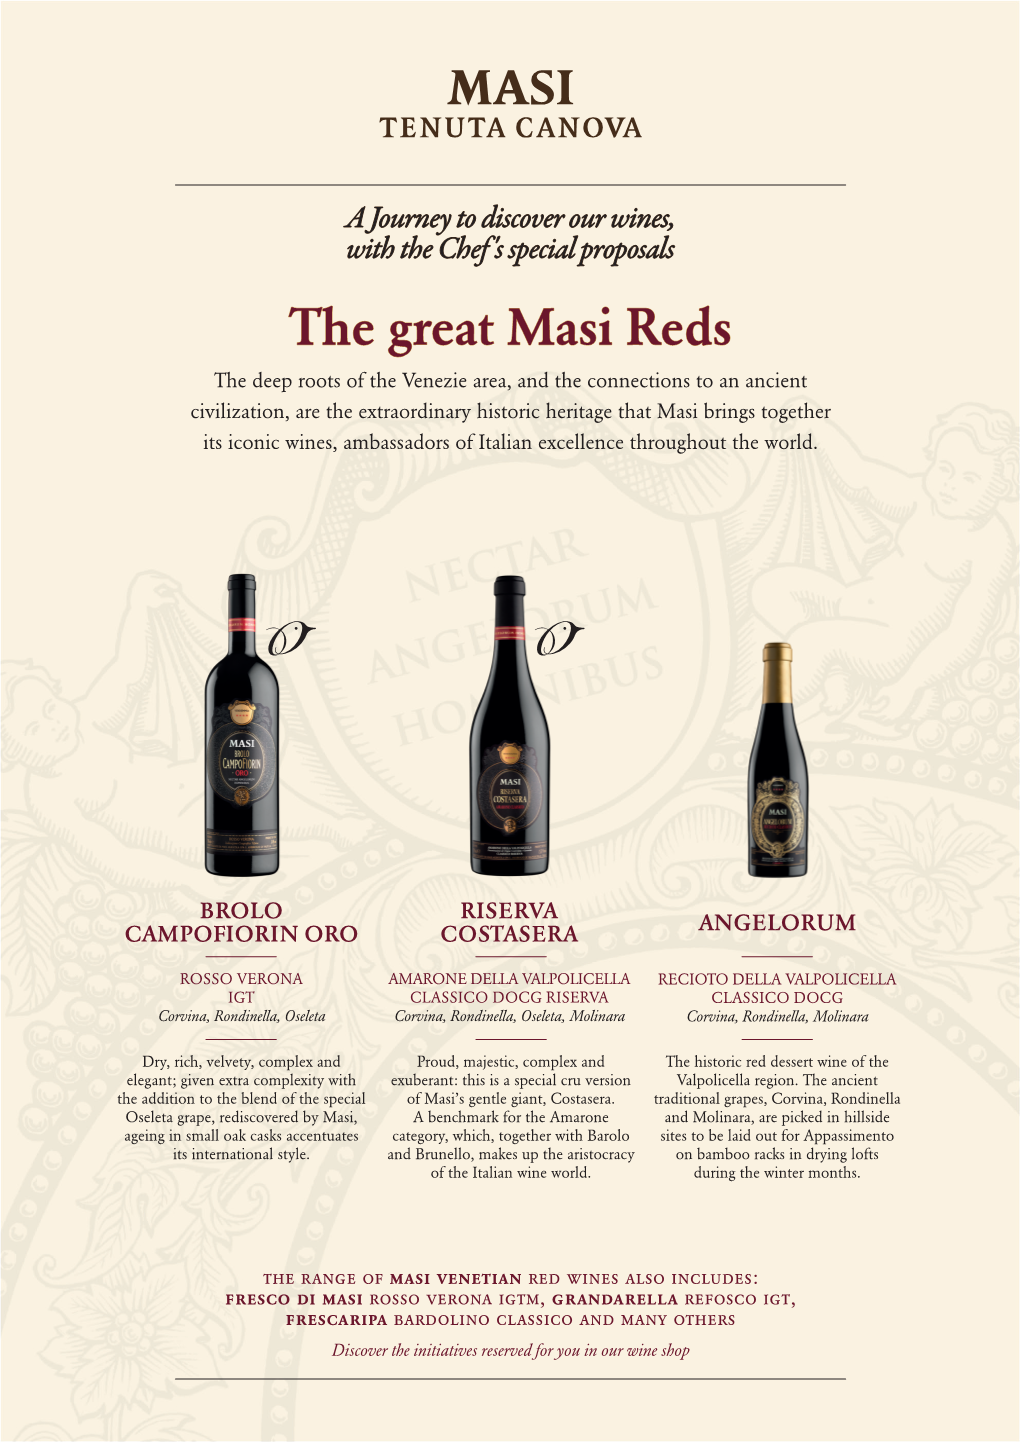 The Great Masi Reds